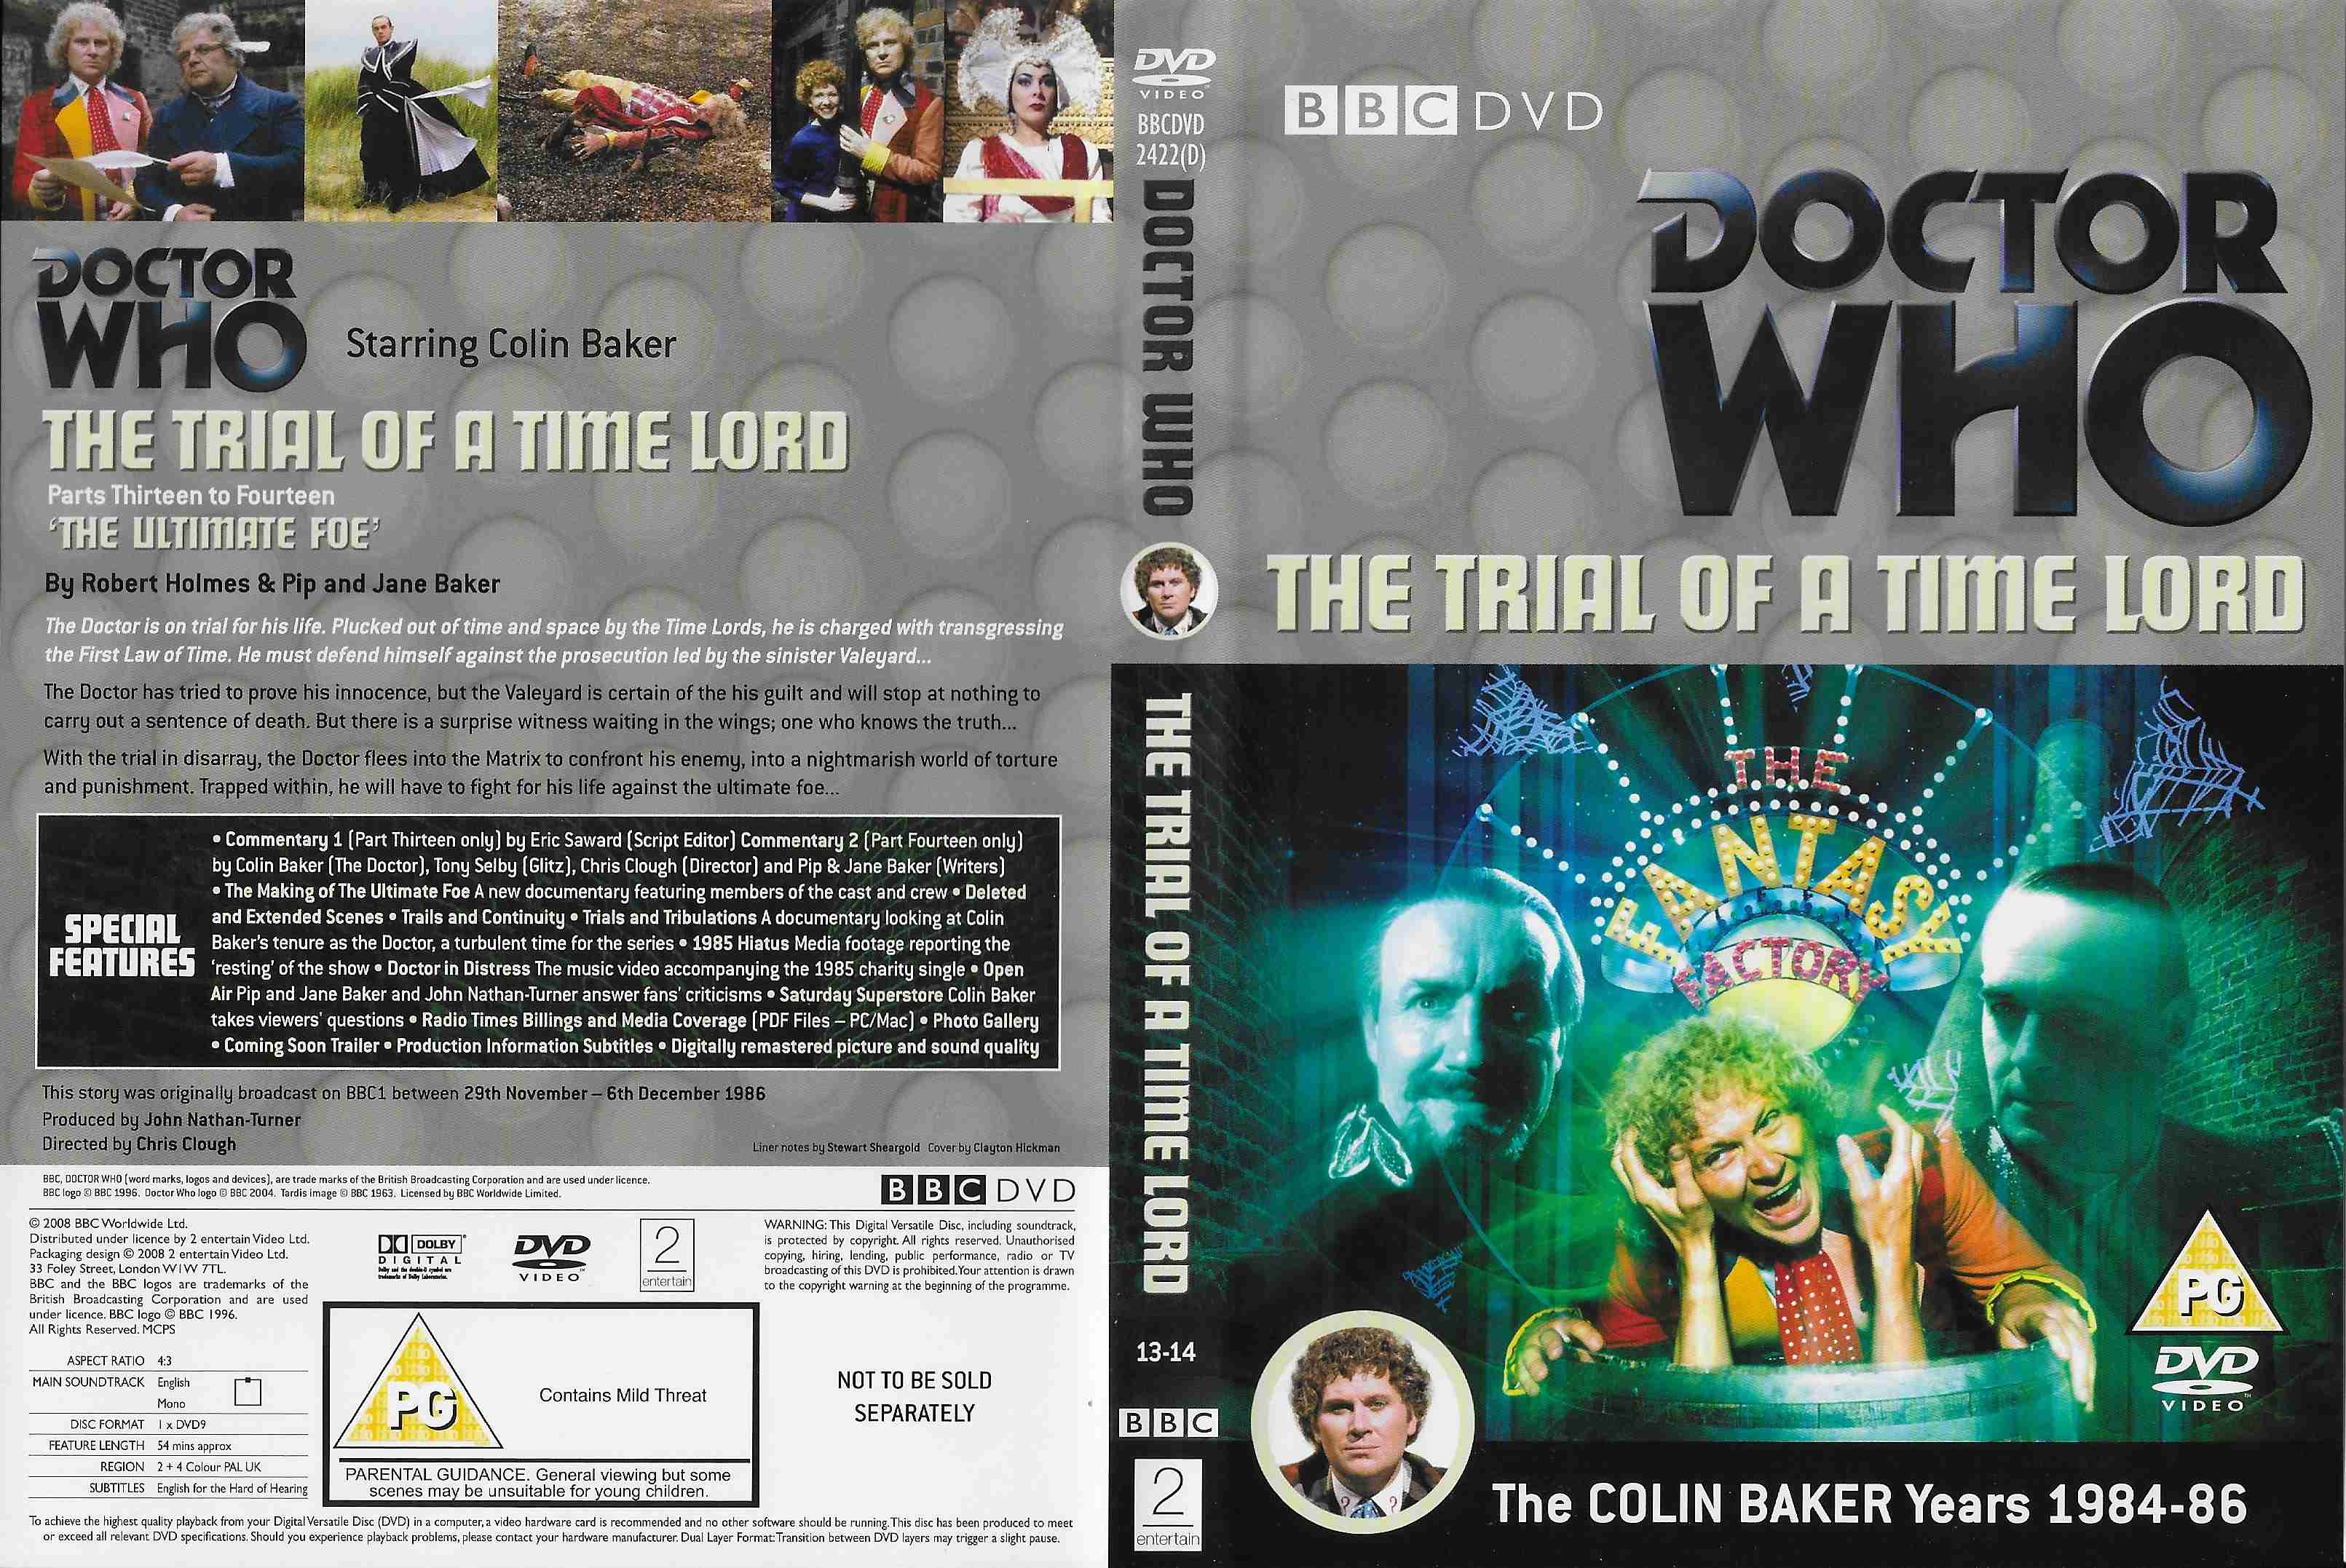 Picture of BBCDVD 2422D Doctor Who - The trial of a Time Lord - Parts 13-14 - The Ultimate Foe by artist Robert Holmes / Pip and Jane Baker from the BBC records and Tapes library